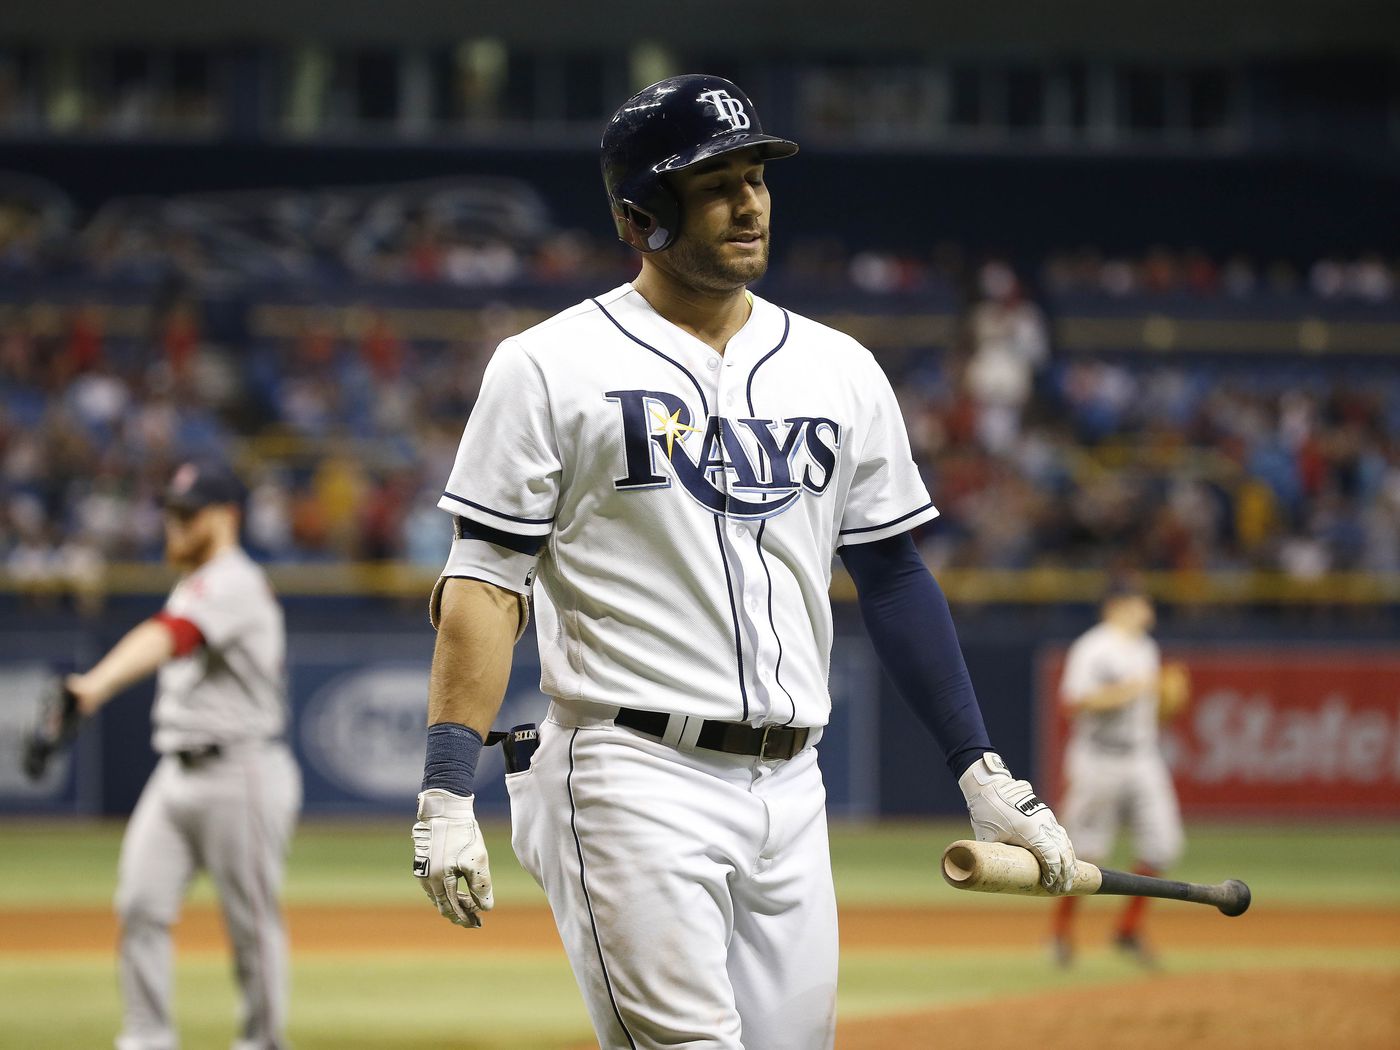 Rays sign kevin kiermaier to